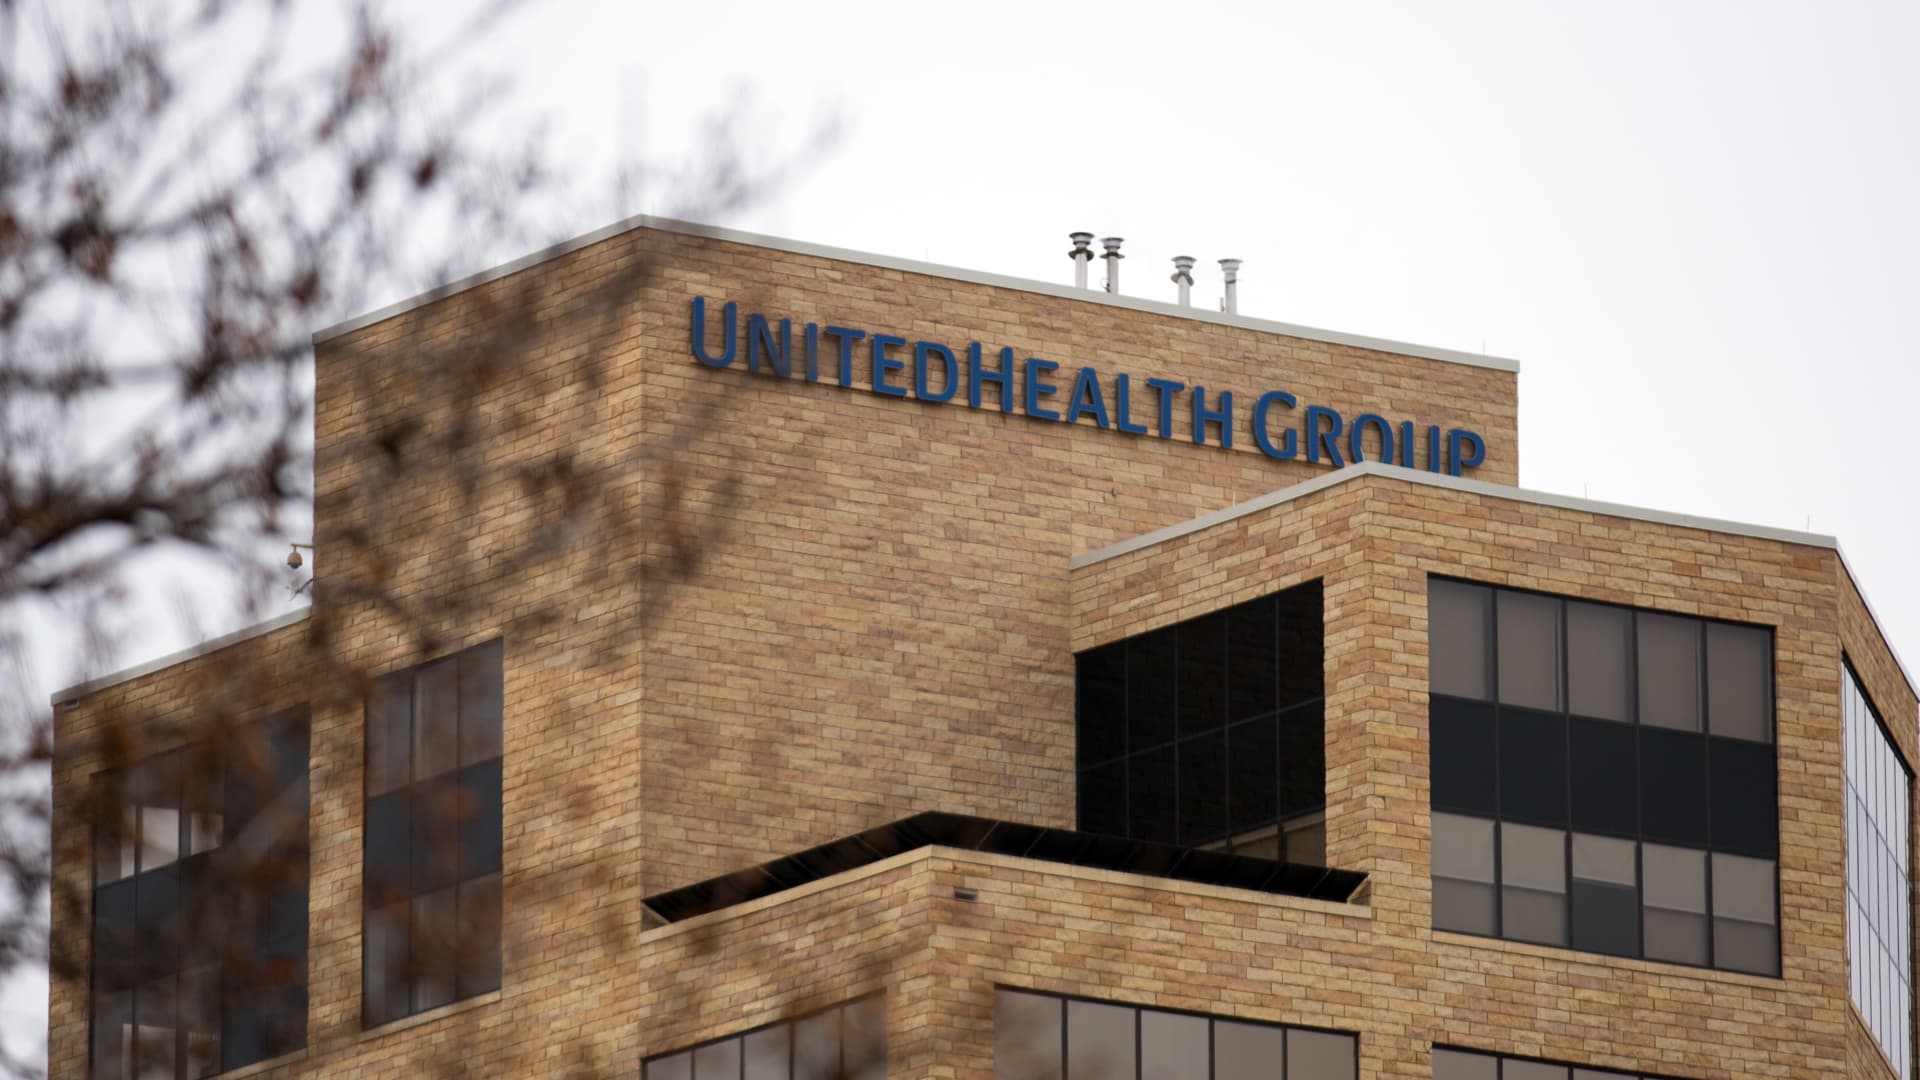 UnitedHealth Group has paid more than $2 billion to providers following cyberattack